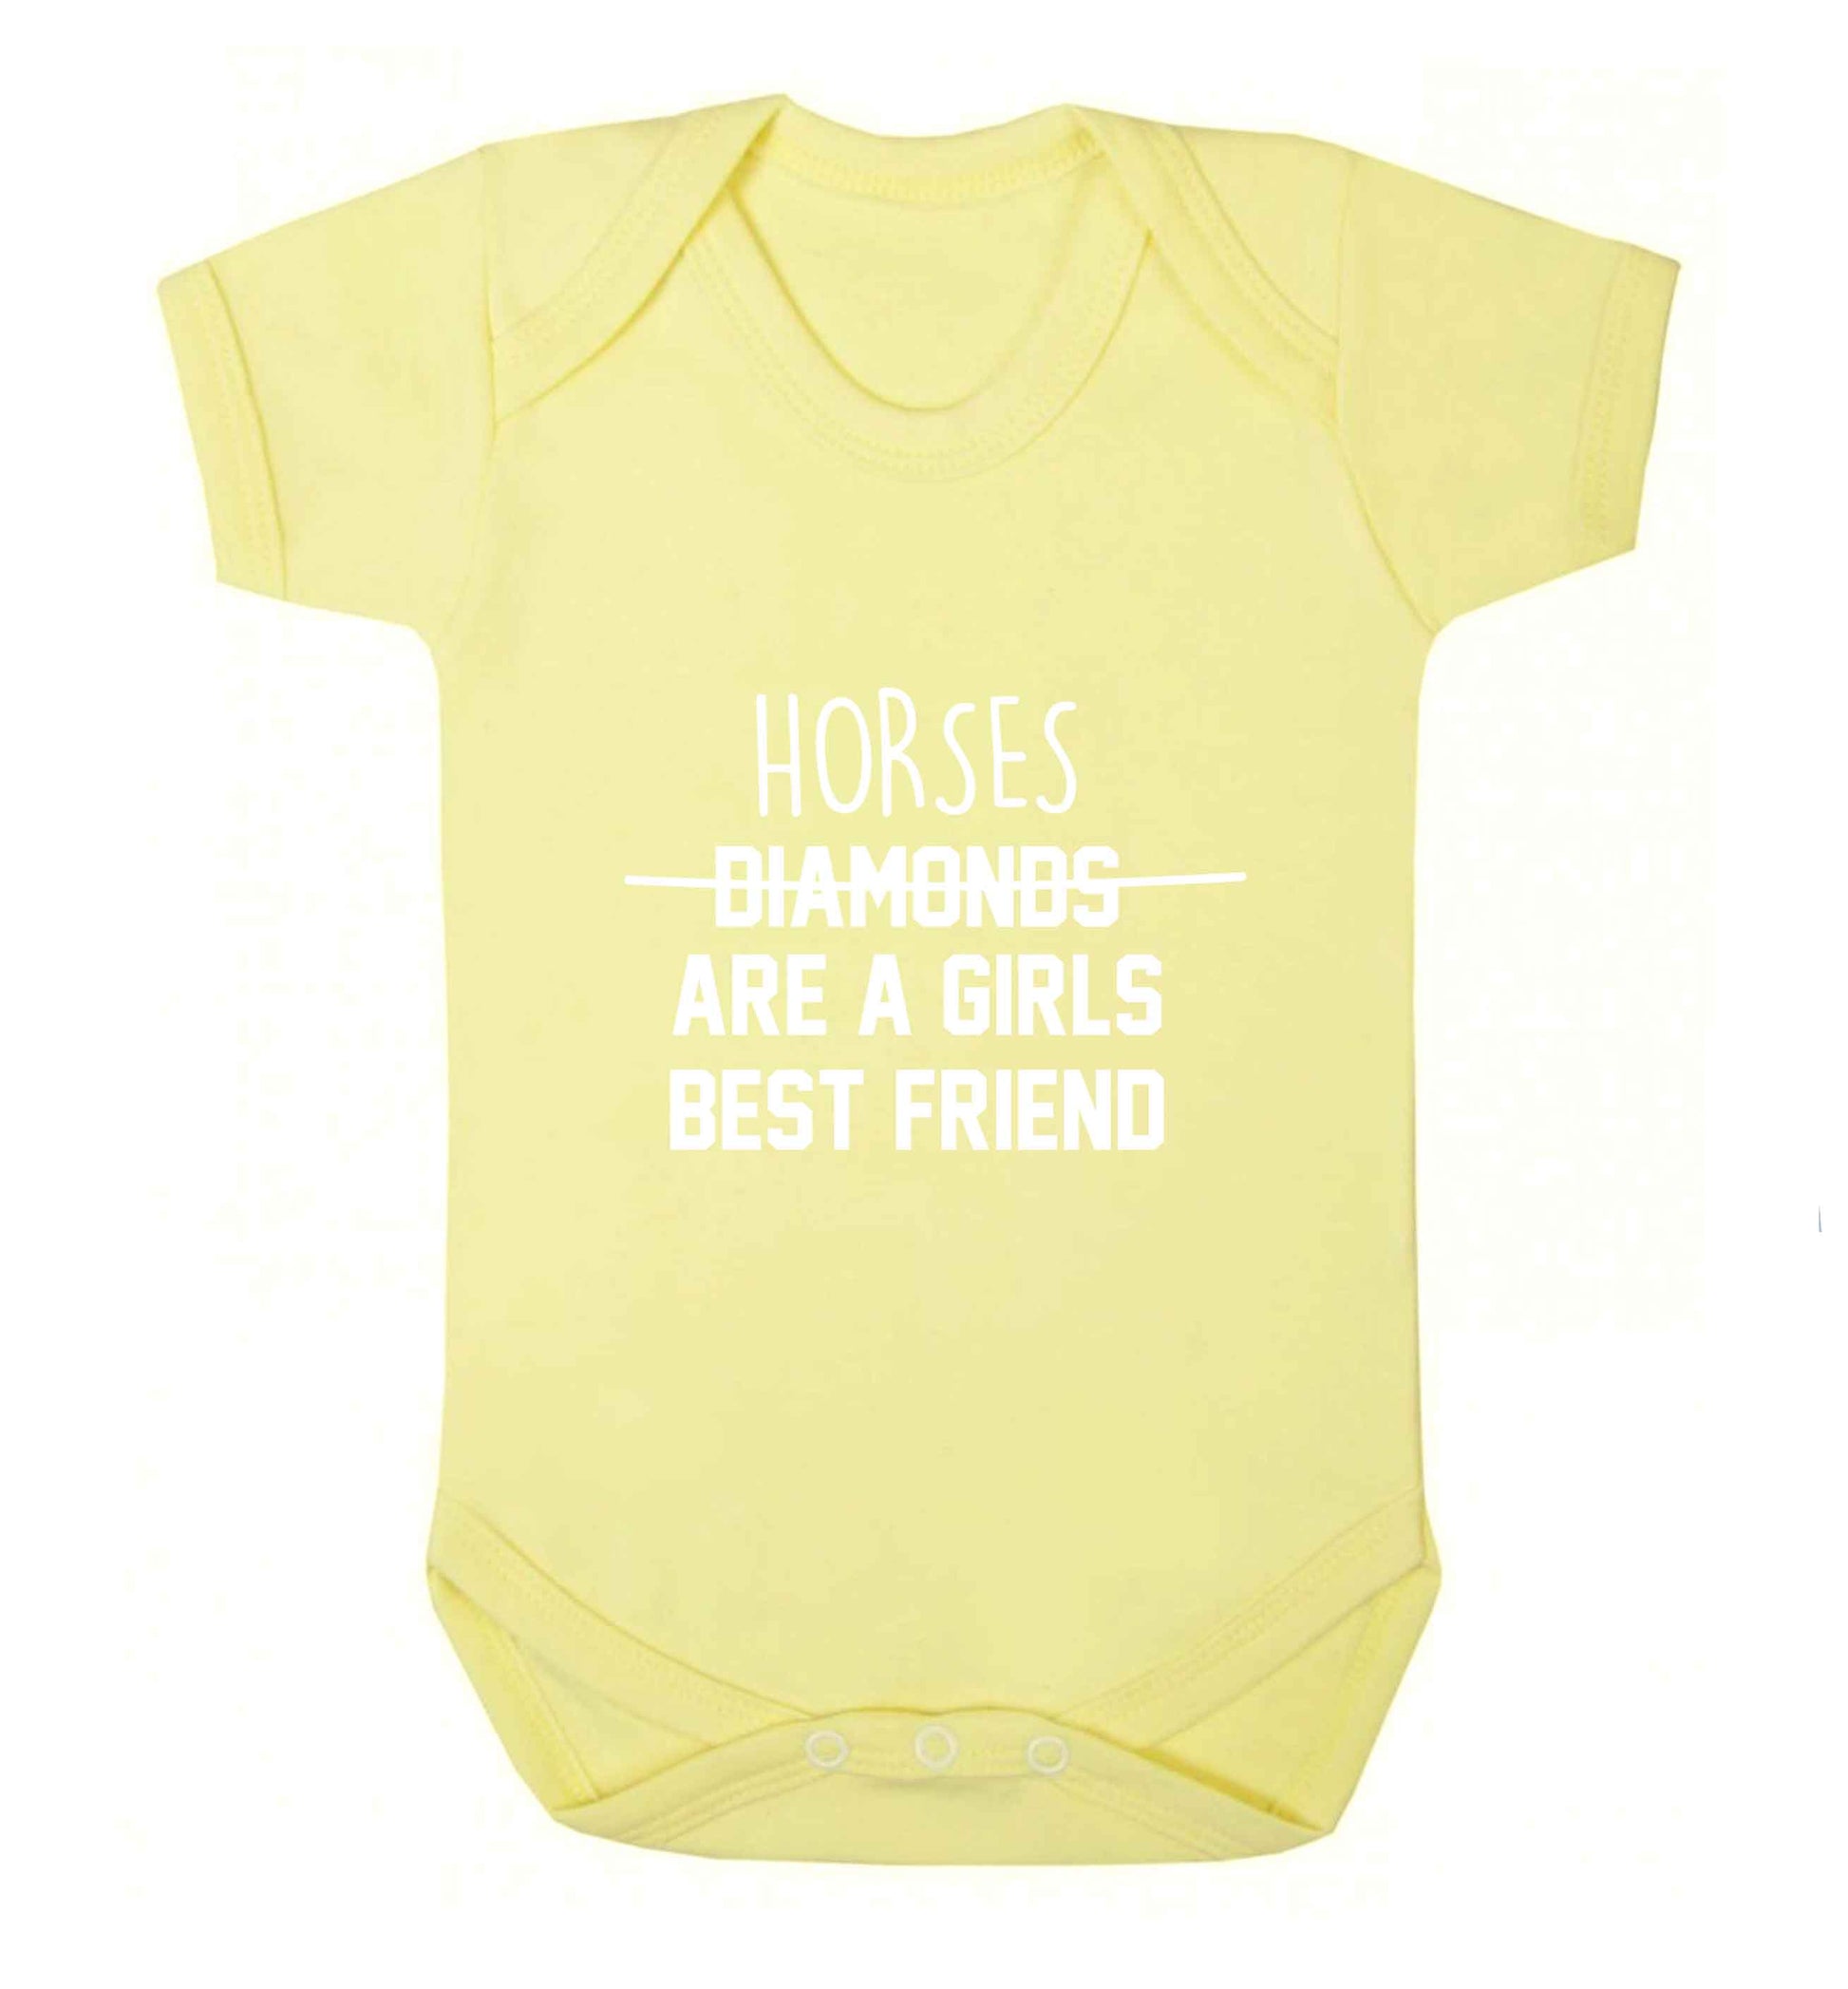 Horses are a girls best friend baby vest pale yellow 18-24 months